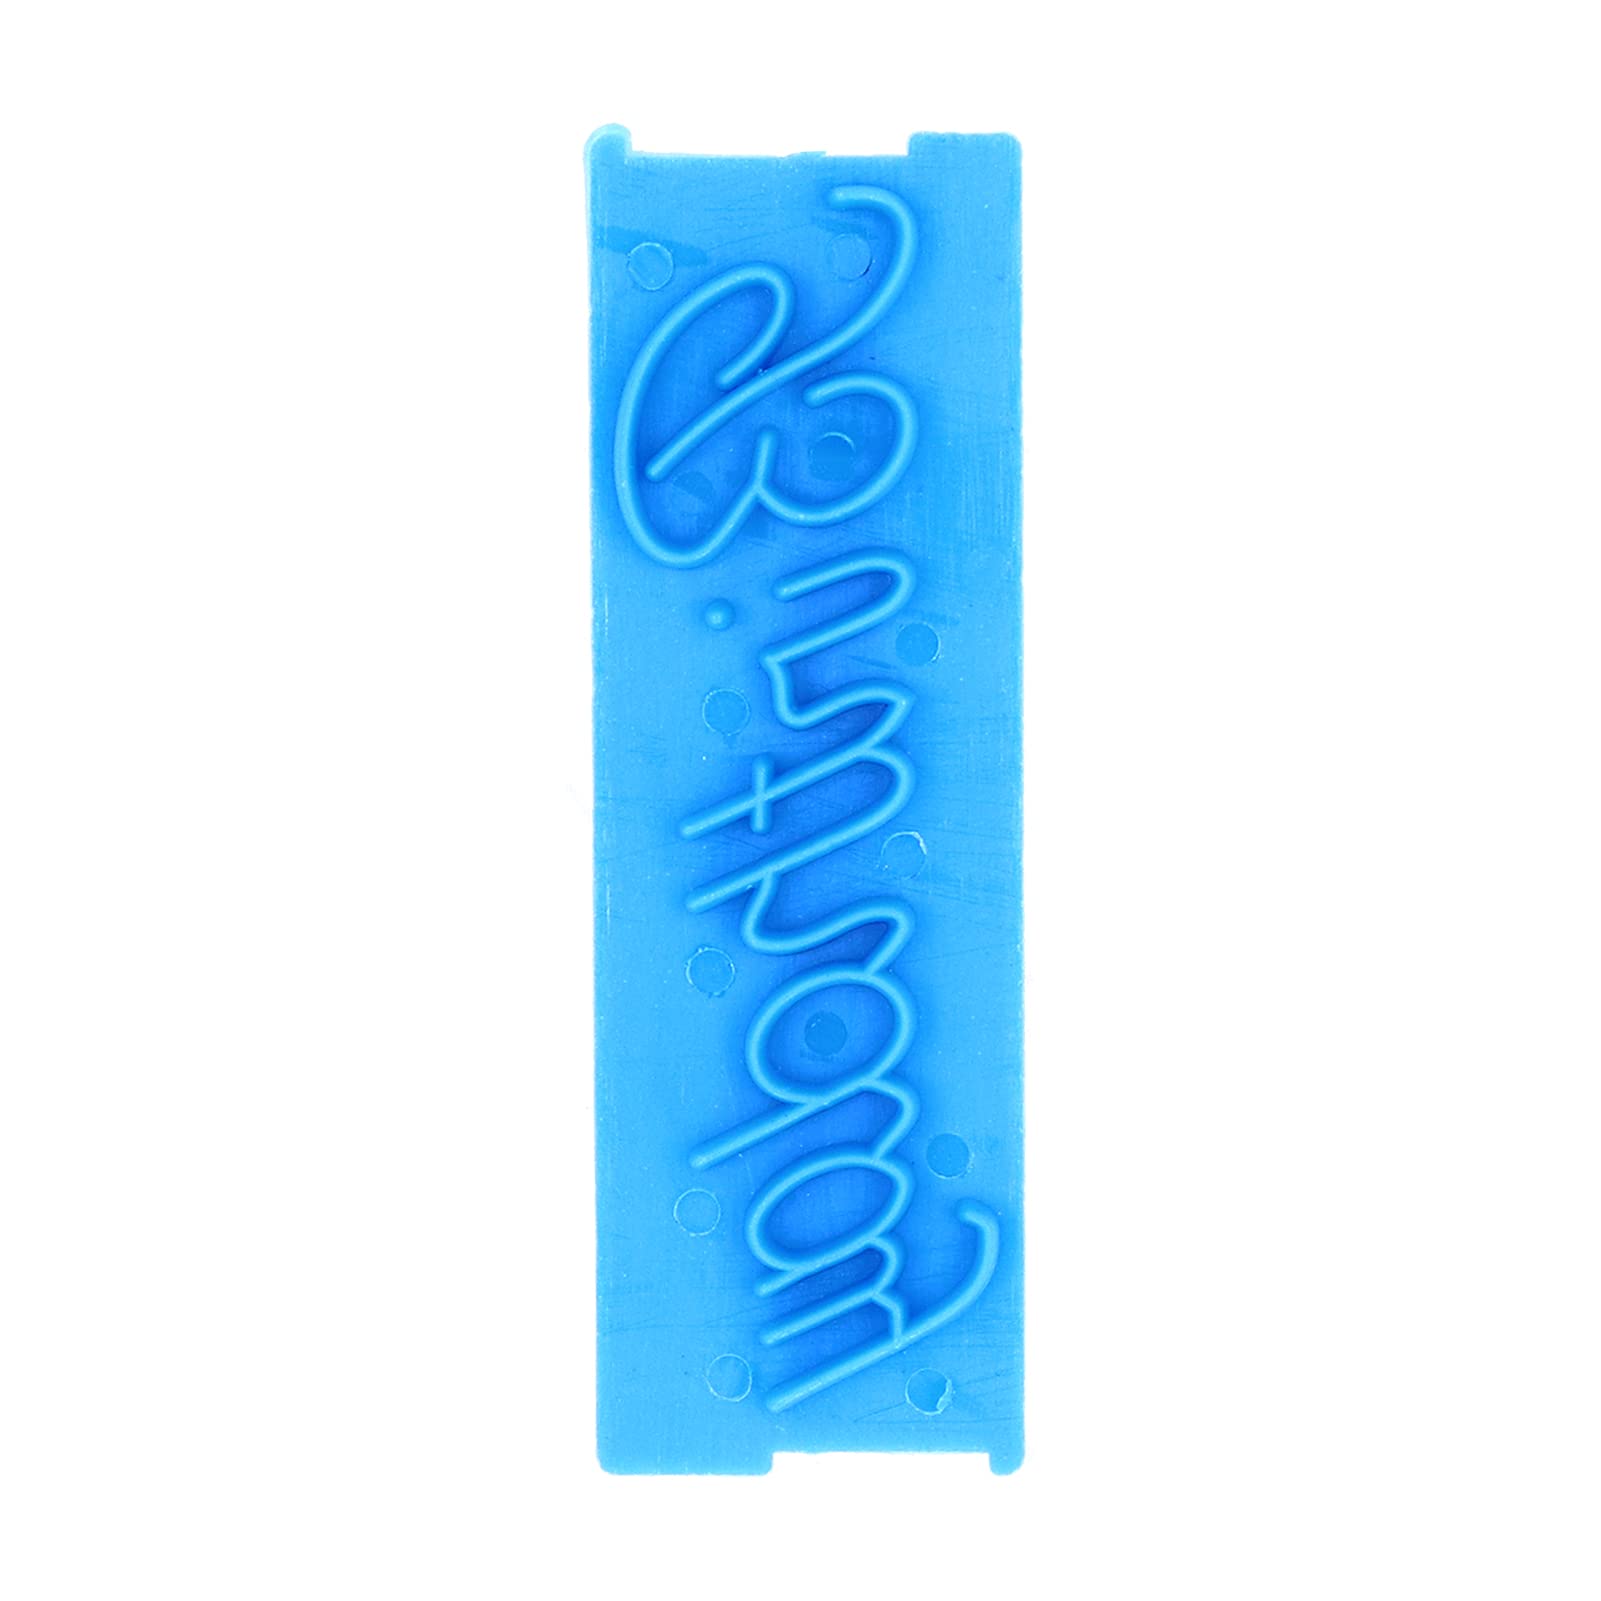 Fdit 6Pcs Words Cake Mould DIY Handwritten Letter Printed Stamp Mould Bakery Supplies Blue Baking Cake Stamp Tools